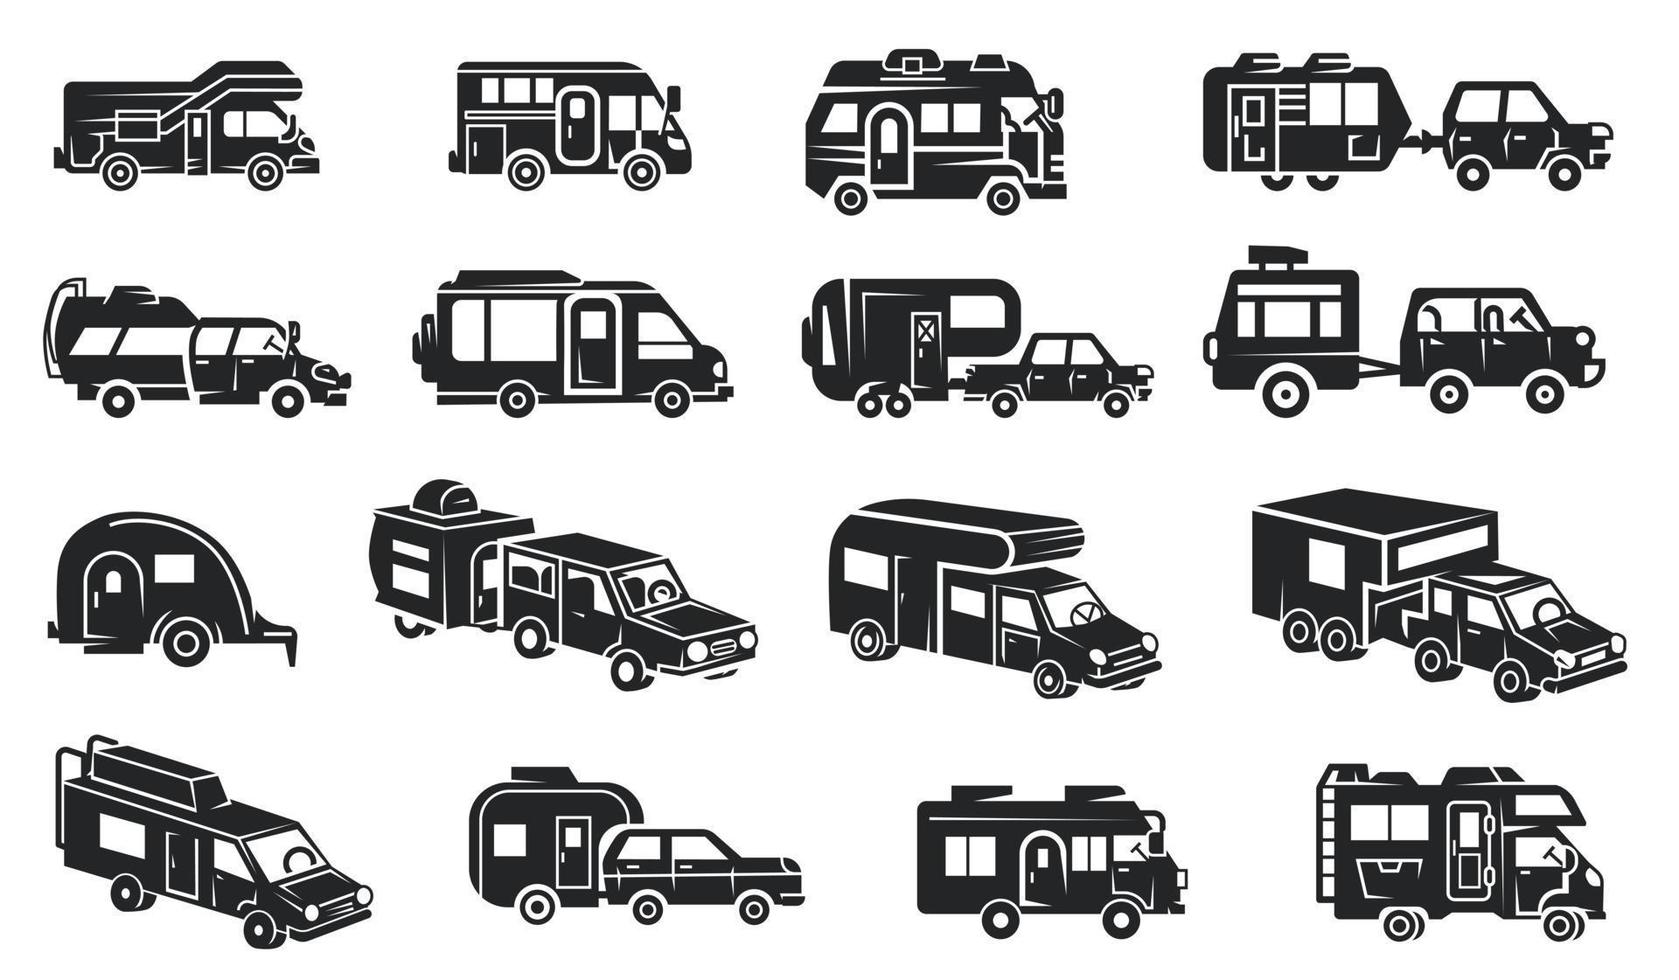 Motorhome icons set, simple style vector